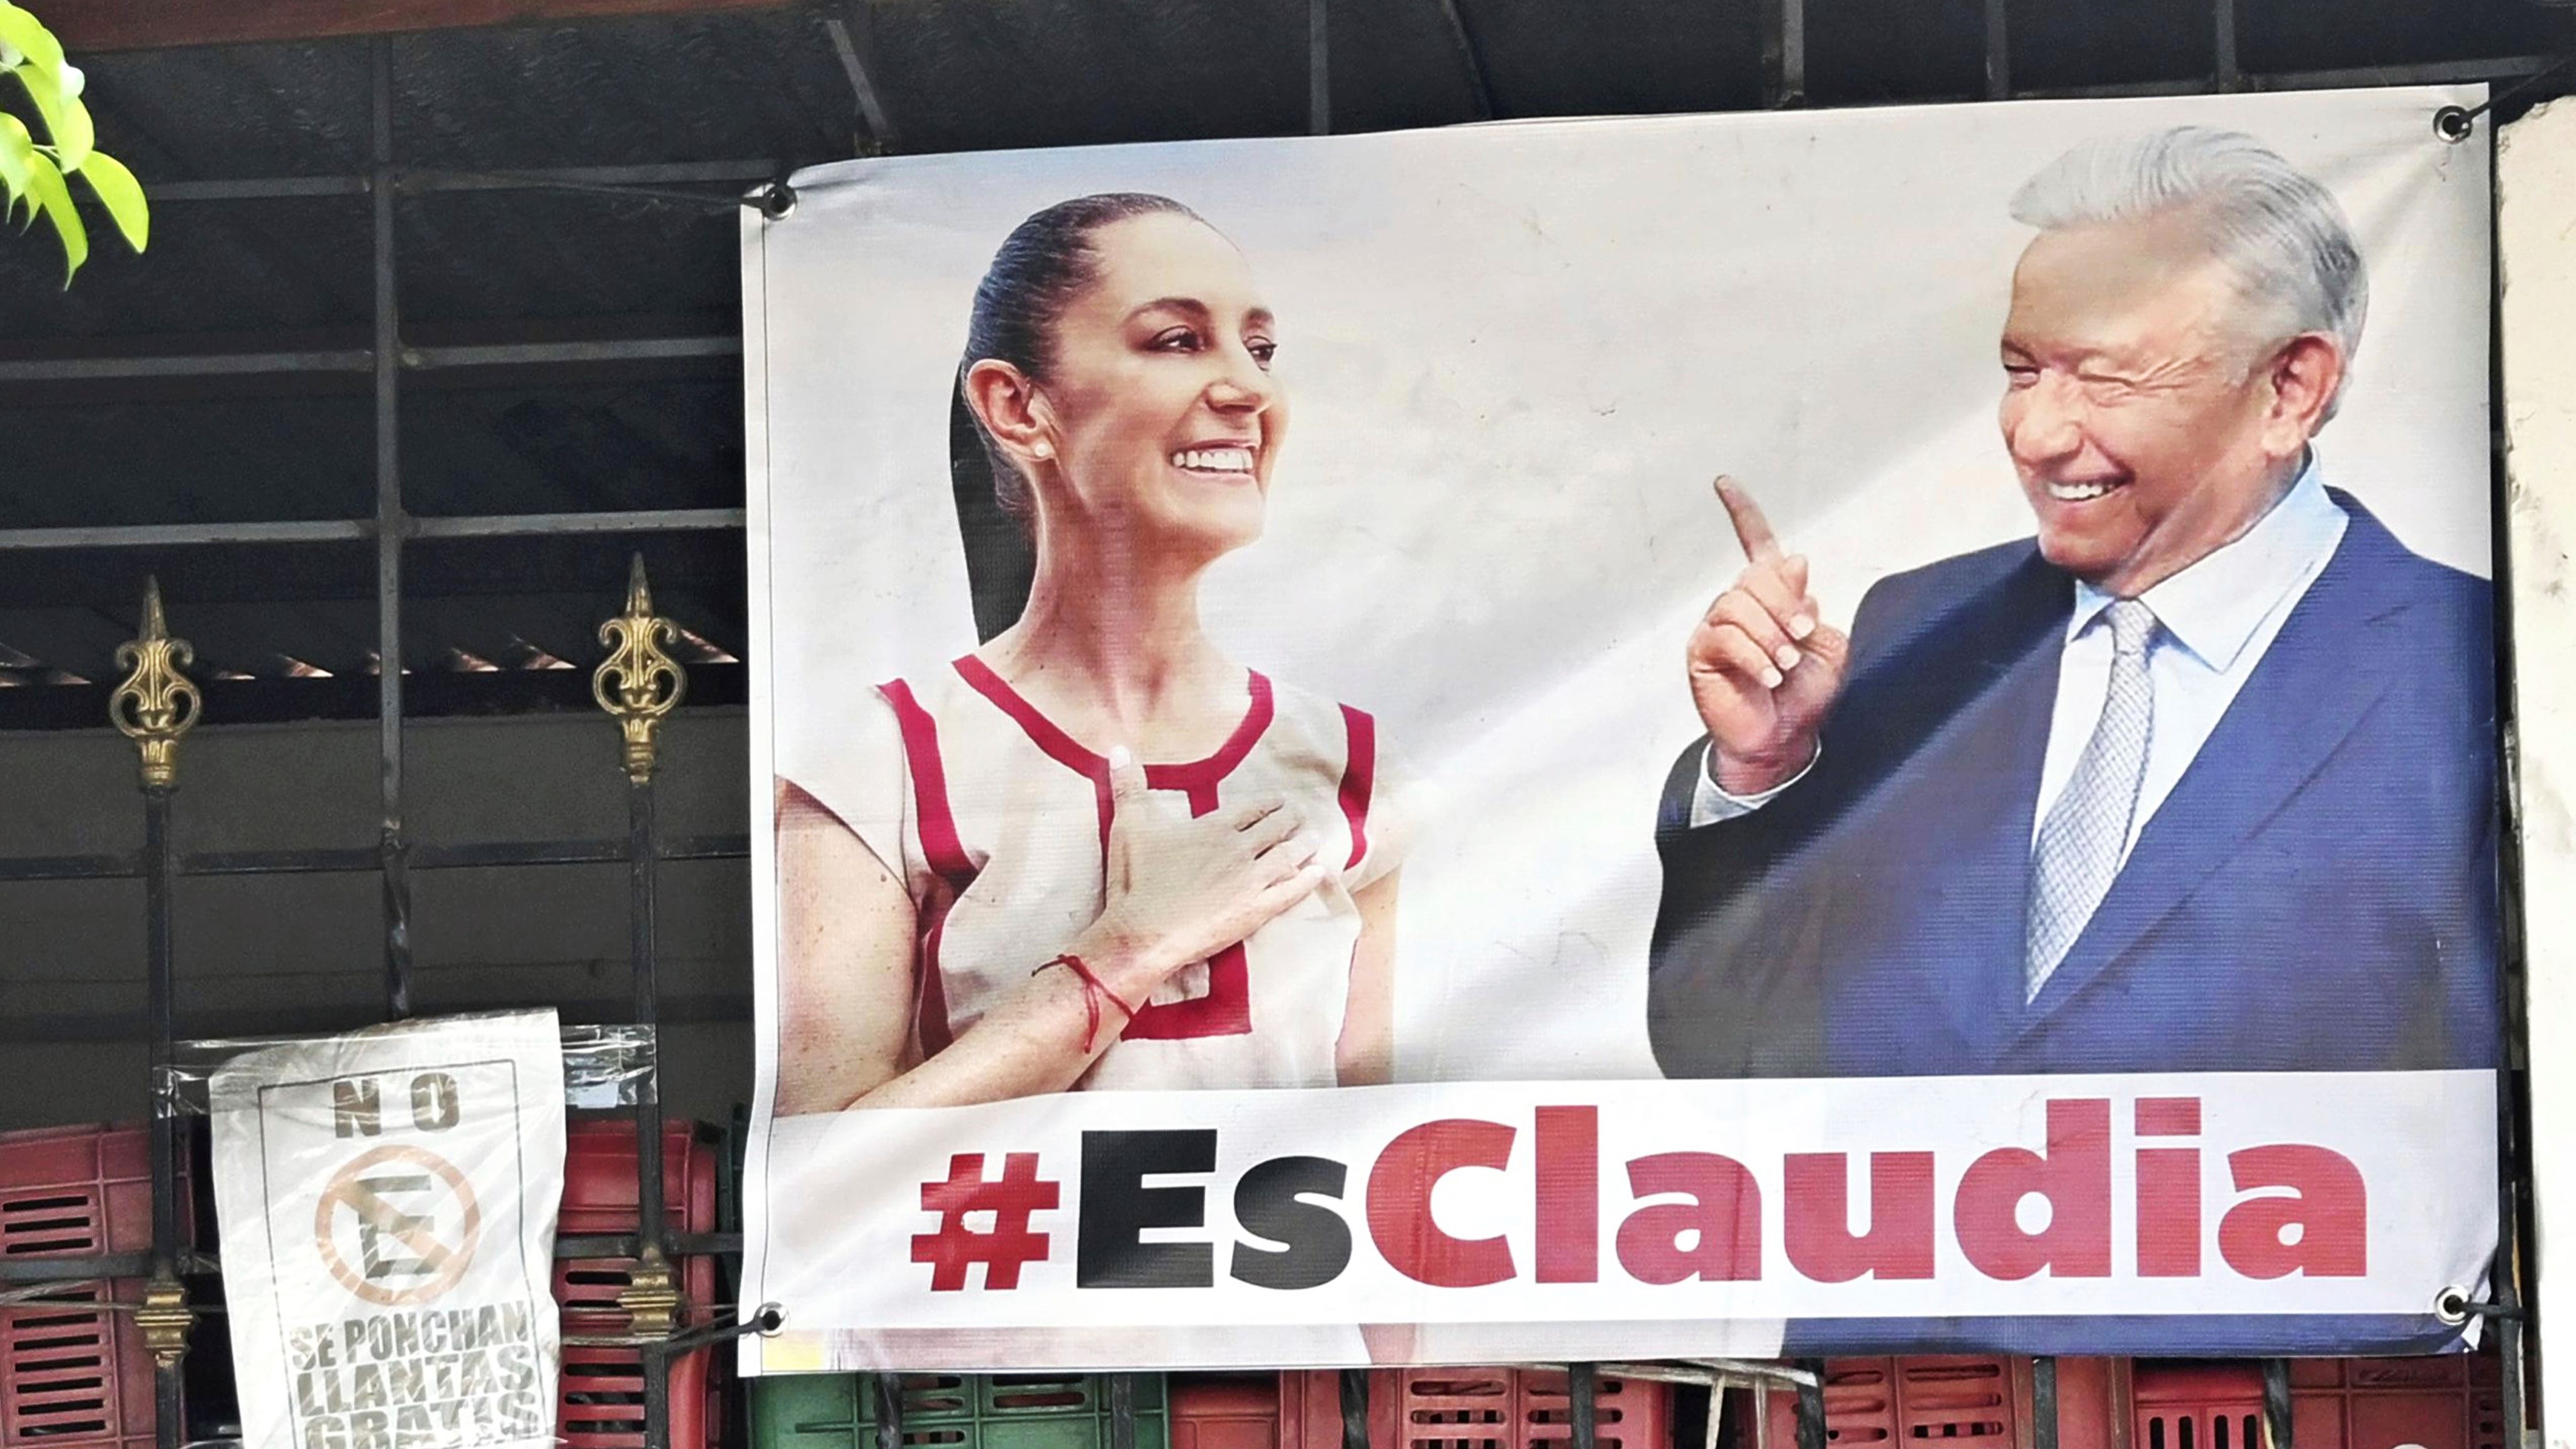 A banner showing Mexican presidential candidate Claudia Sheinbaum and President Andres Manuel Lopez Obrador.